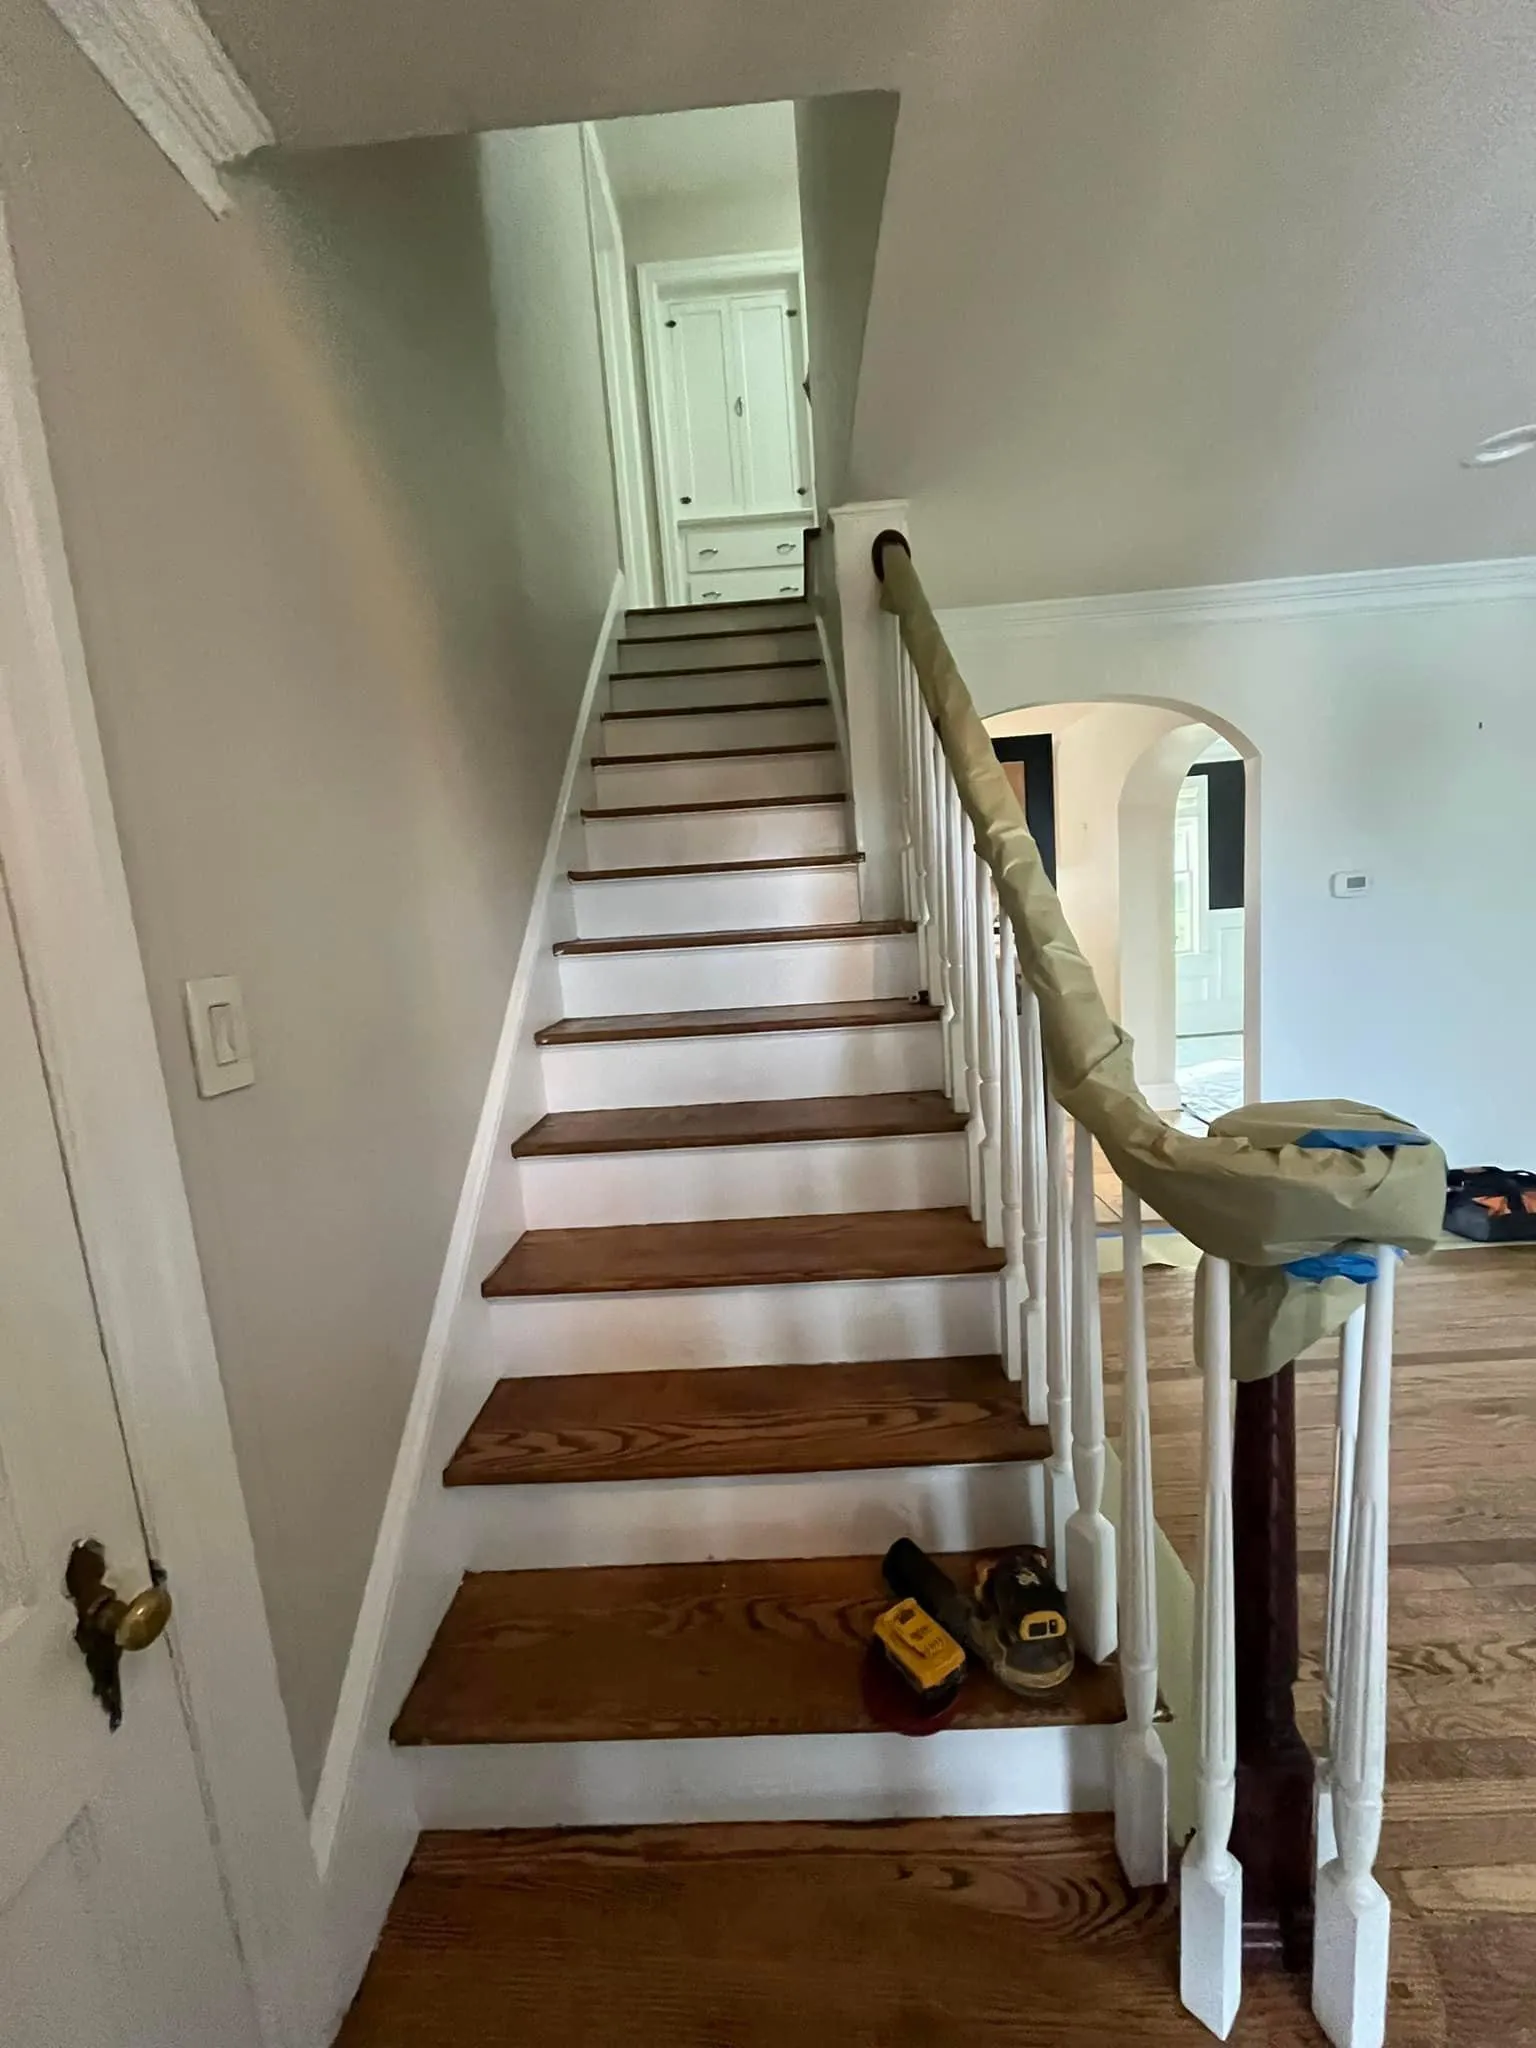 Interior Painting for MHC Painting in Bucks County,  PA